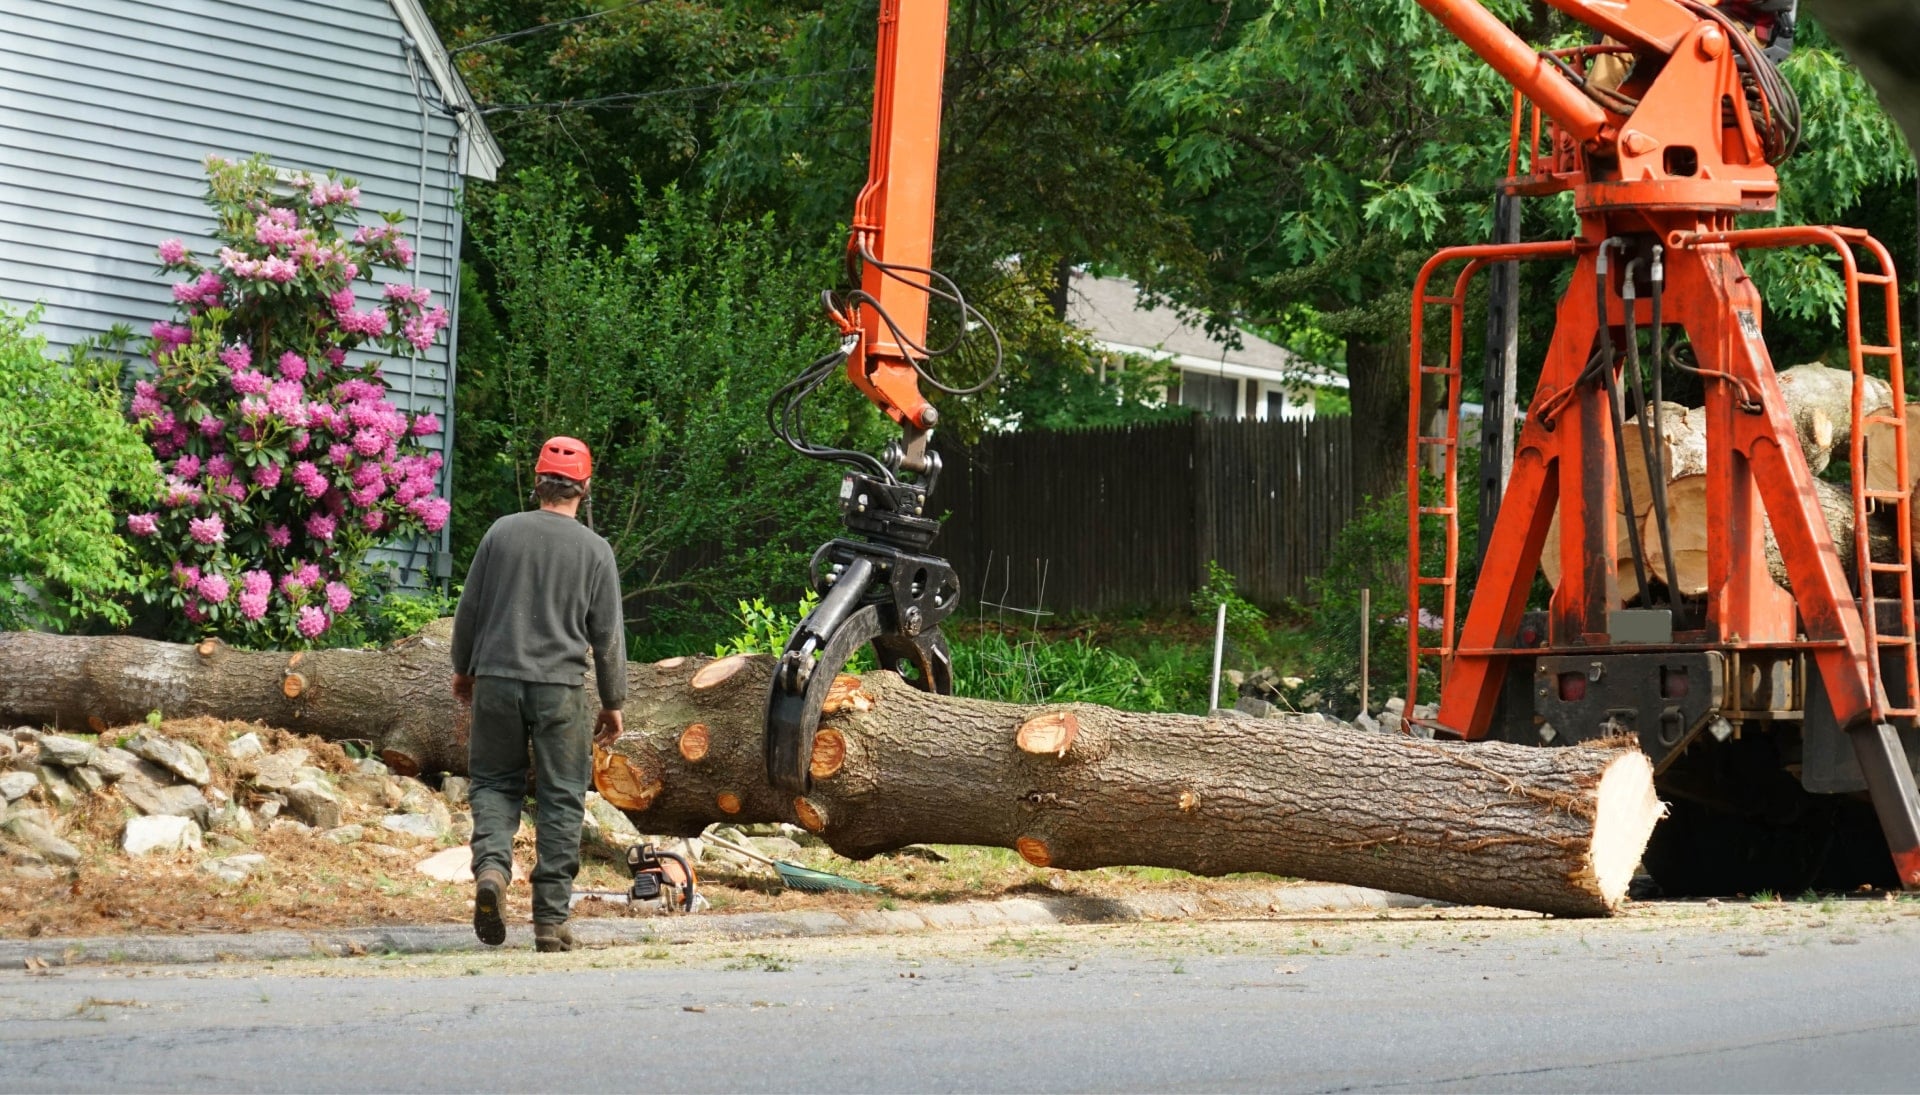 Local partner for Tree removal services in Pocatello